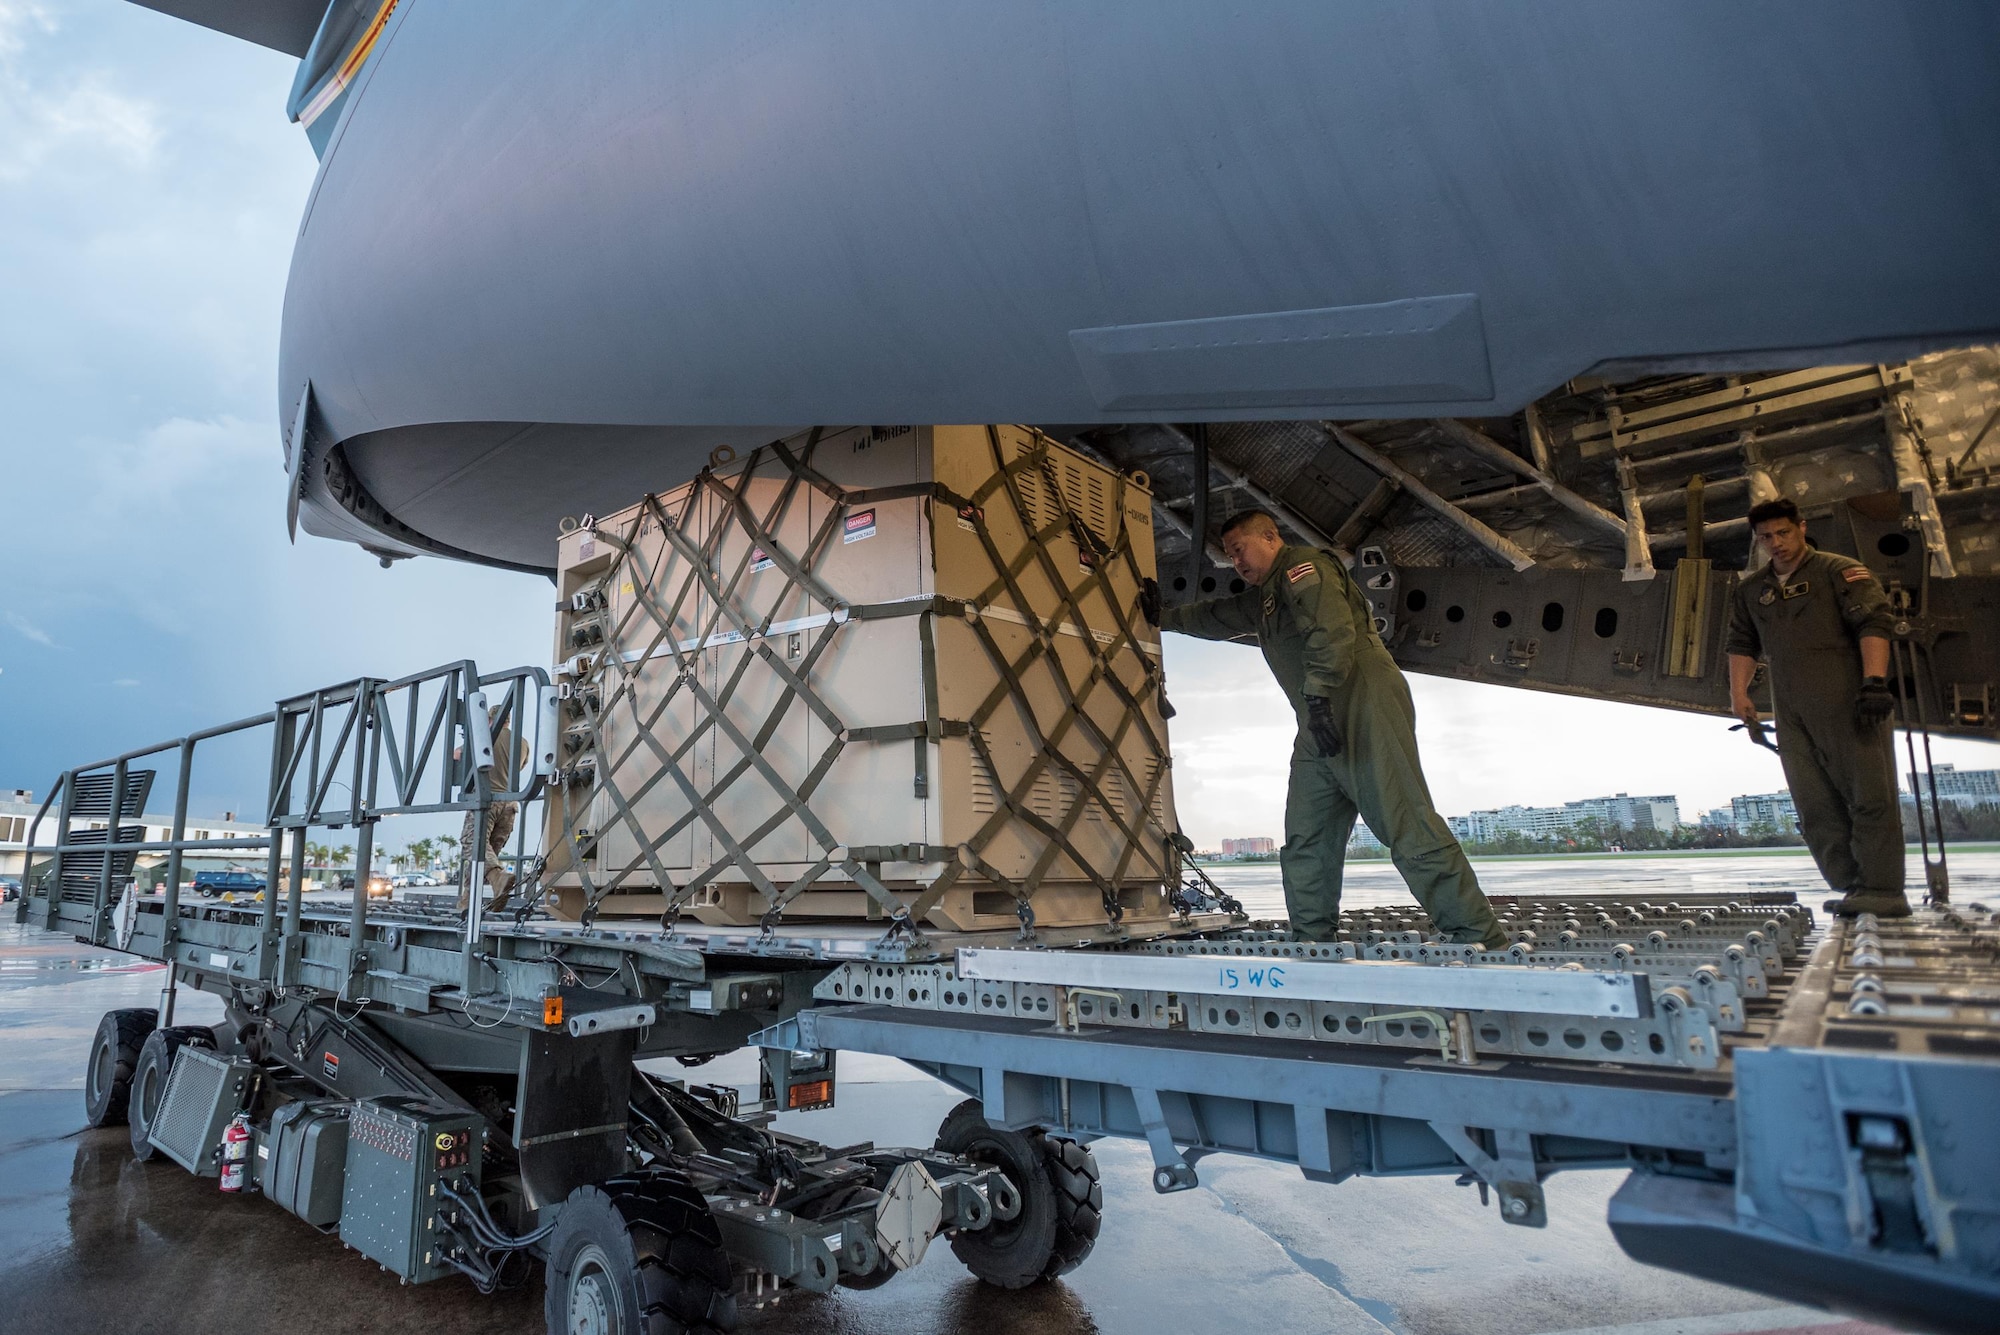 Loadmasters from the Hawaii Air National Guard dowload relief supplies from their C-17 aircraft at Luis Muñoz Marín International Airport in San Juan, Puerto Rico, in the wake of Hurricane Maria Oct. 6, 2017. An aerial port of debarkation at the airport has processed more than 7.2 million pounds of cargo and humanitarian aid since Sept. 23. (U.S. Air National Guard photo by Lt. Col. Dale Greer)